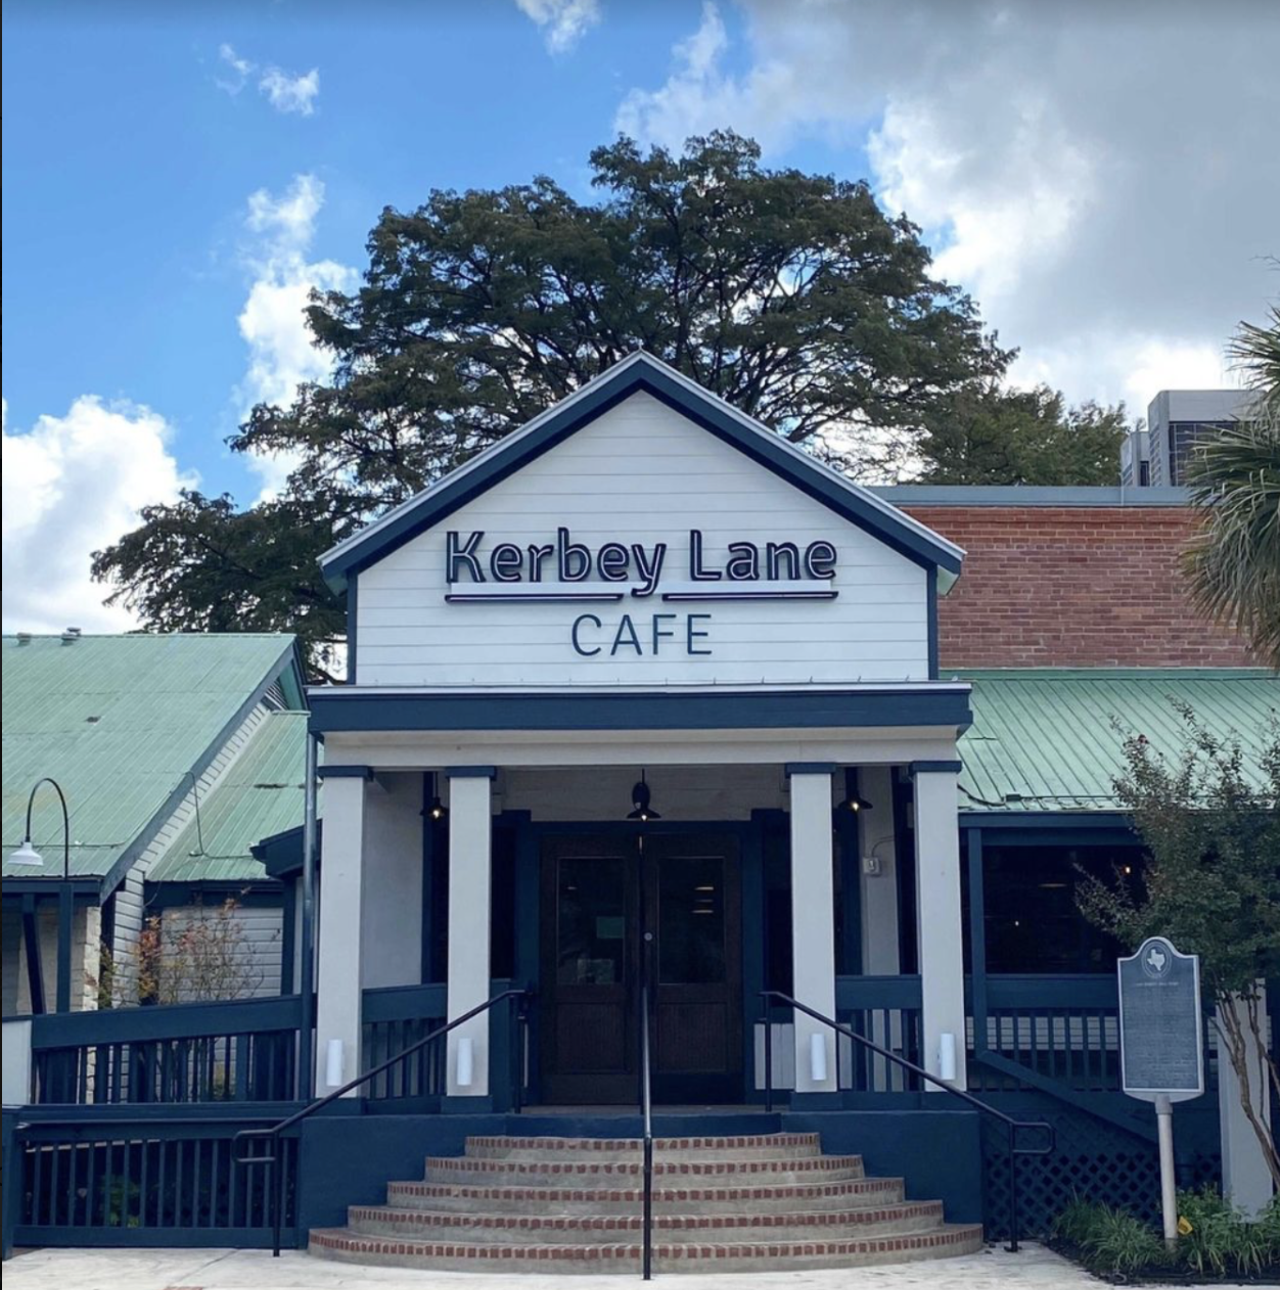 Kerbey Lane Cafe
5515 N. Loop 1604 W., kerbeylanecafe.com
Longtime Austin staple Kerbey Lane Cafe has set its sights on the Alamo City for a future expansion. Menu items will include diner favorites including waffles, breakfast platters and home-style entrees, with an expected completion date in March 0f 2022. 
Photo via Instagram / kerbeylanecafe